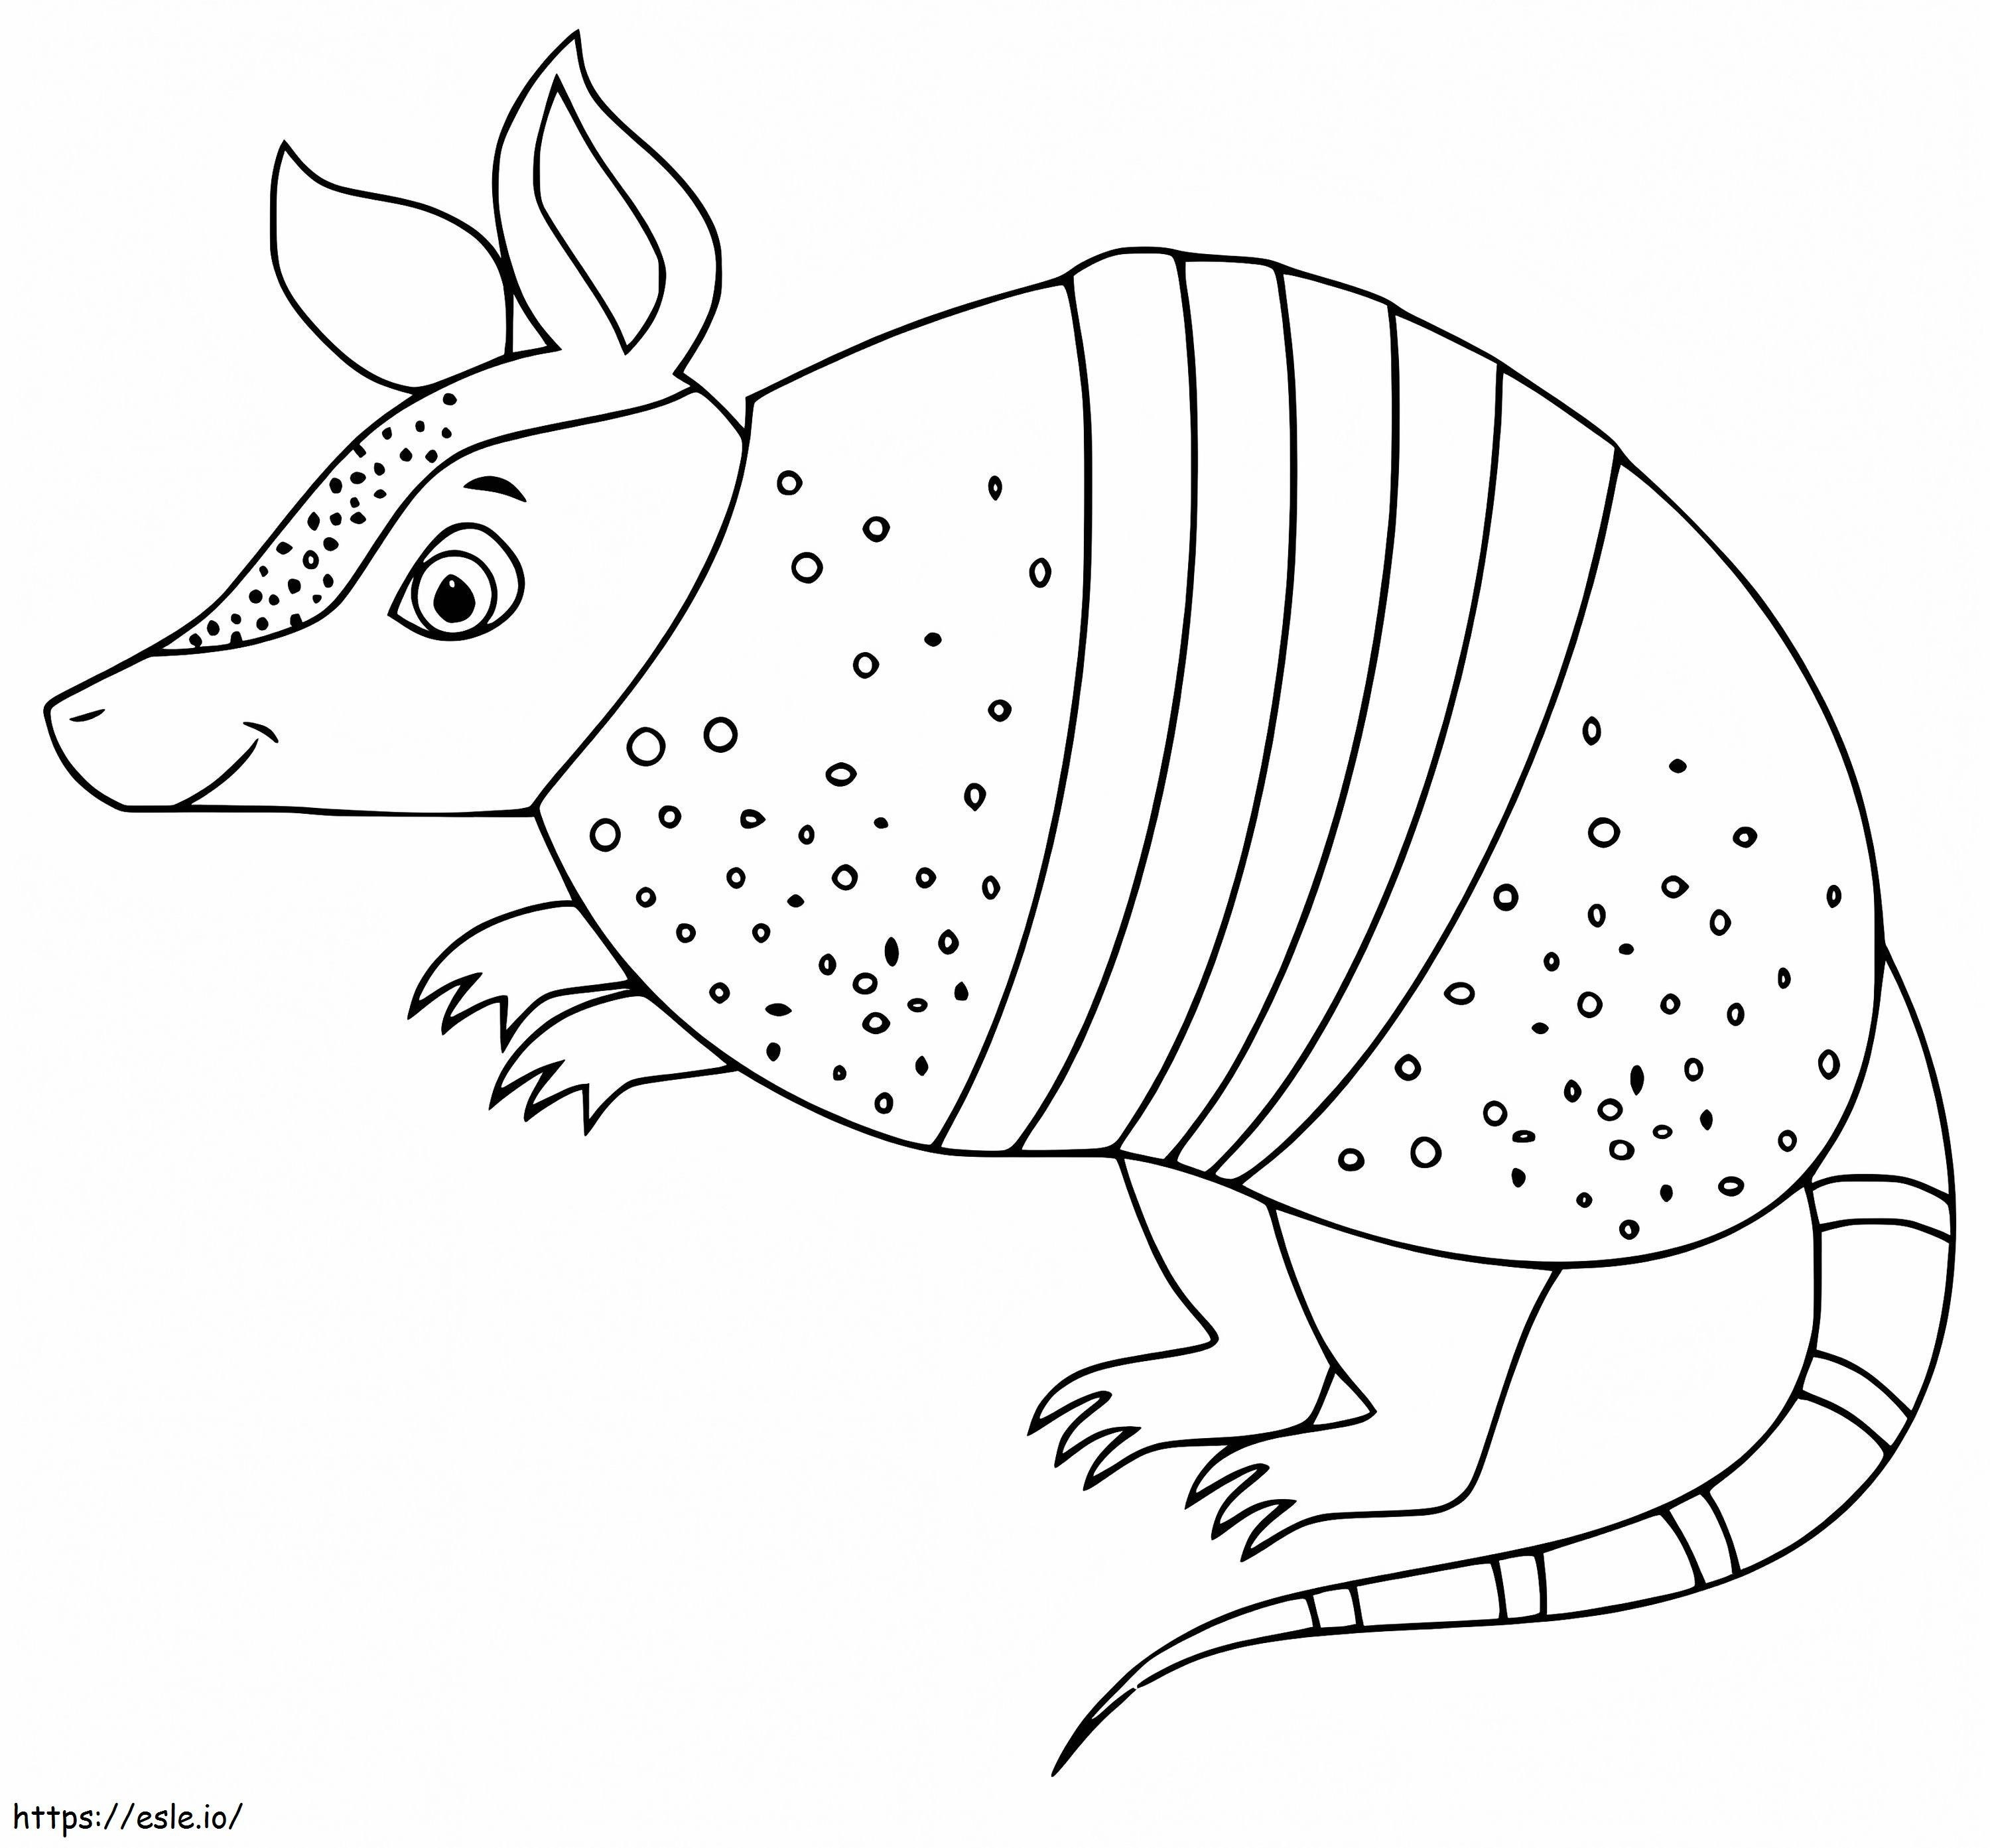 Adorable Armadilo Smiling coloring page